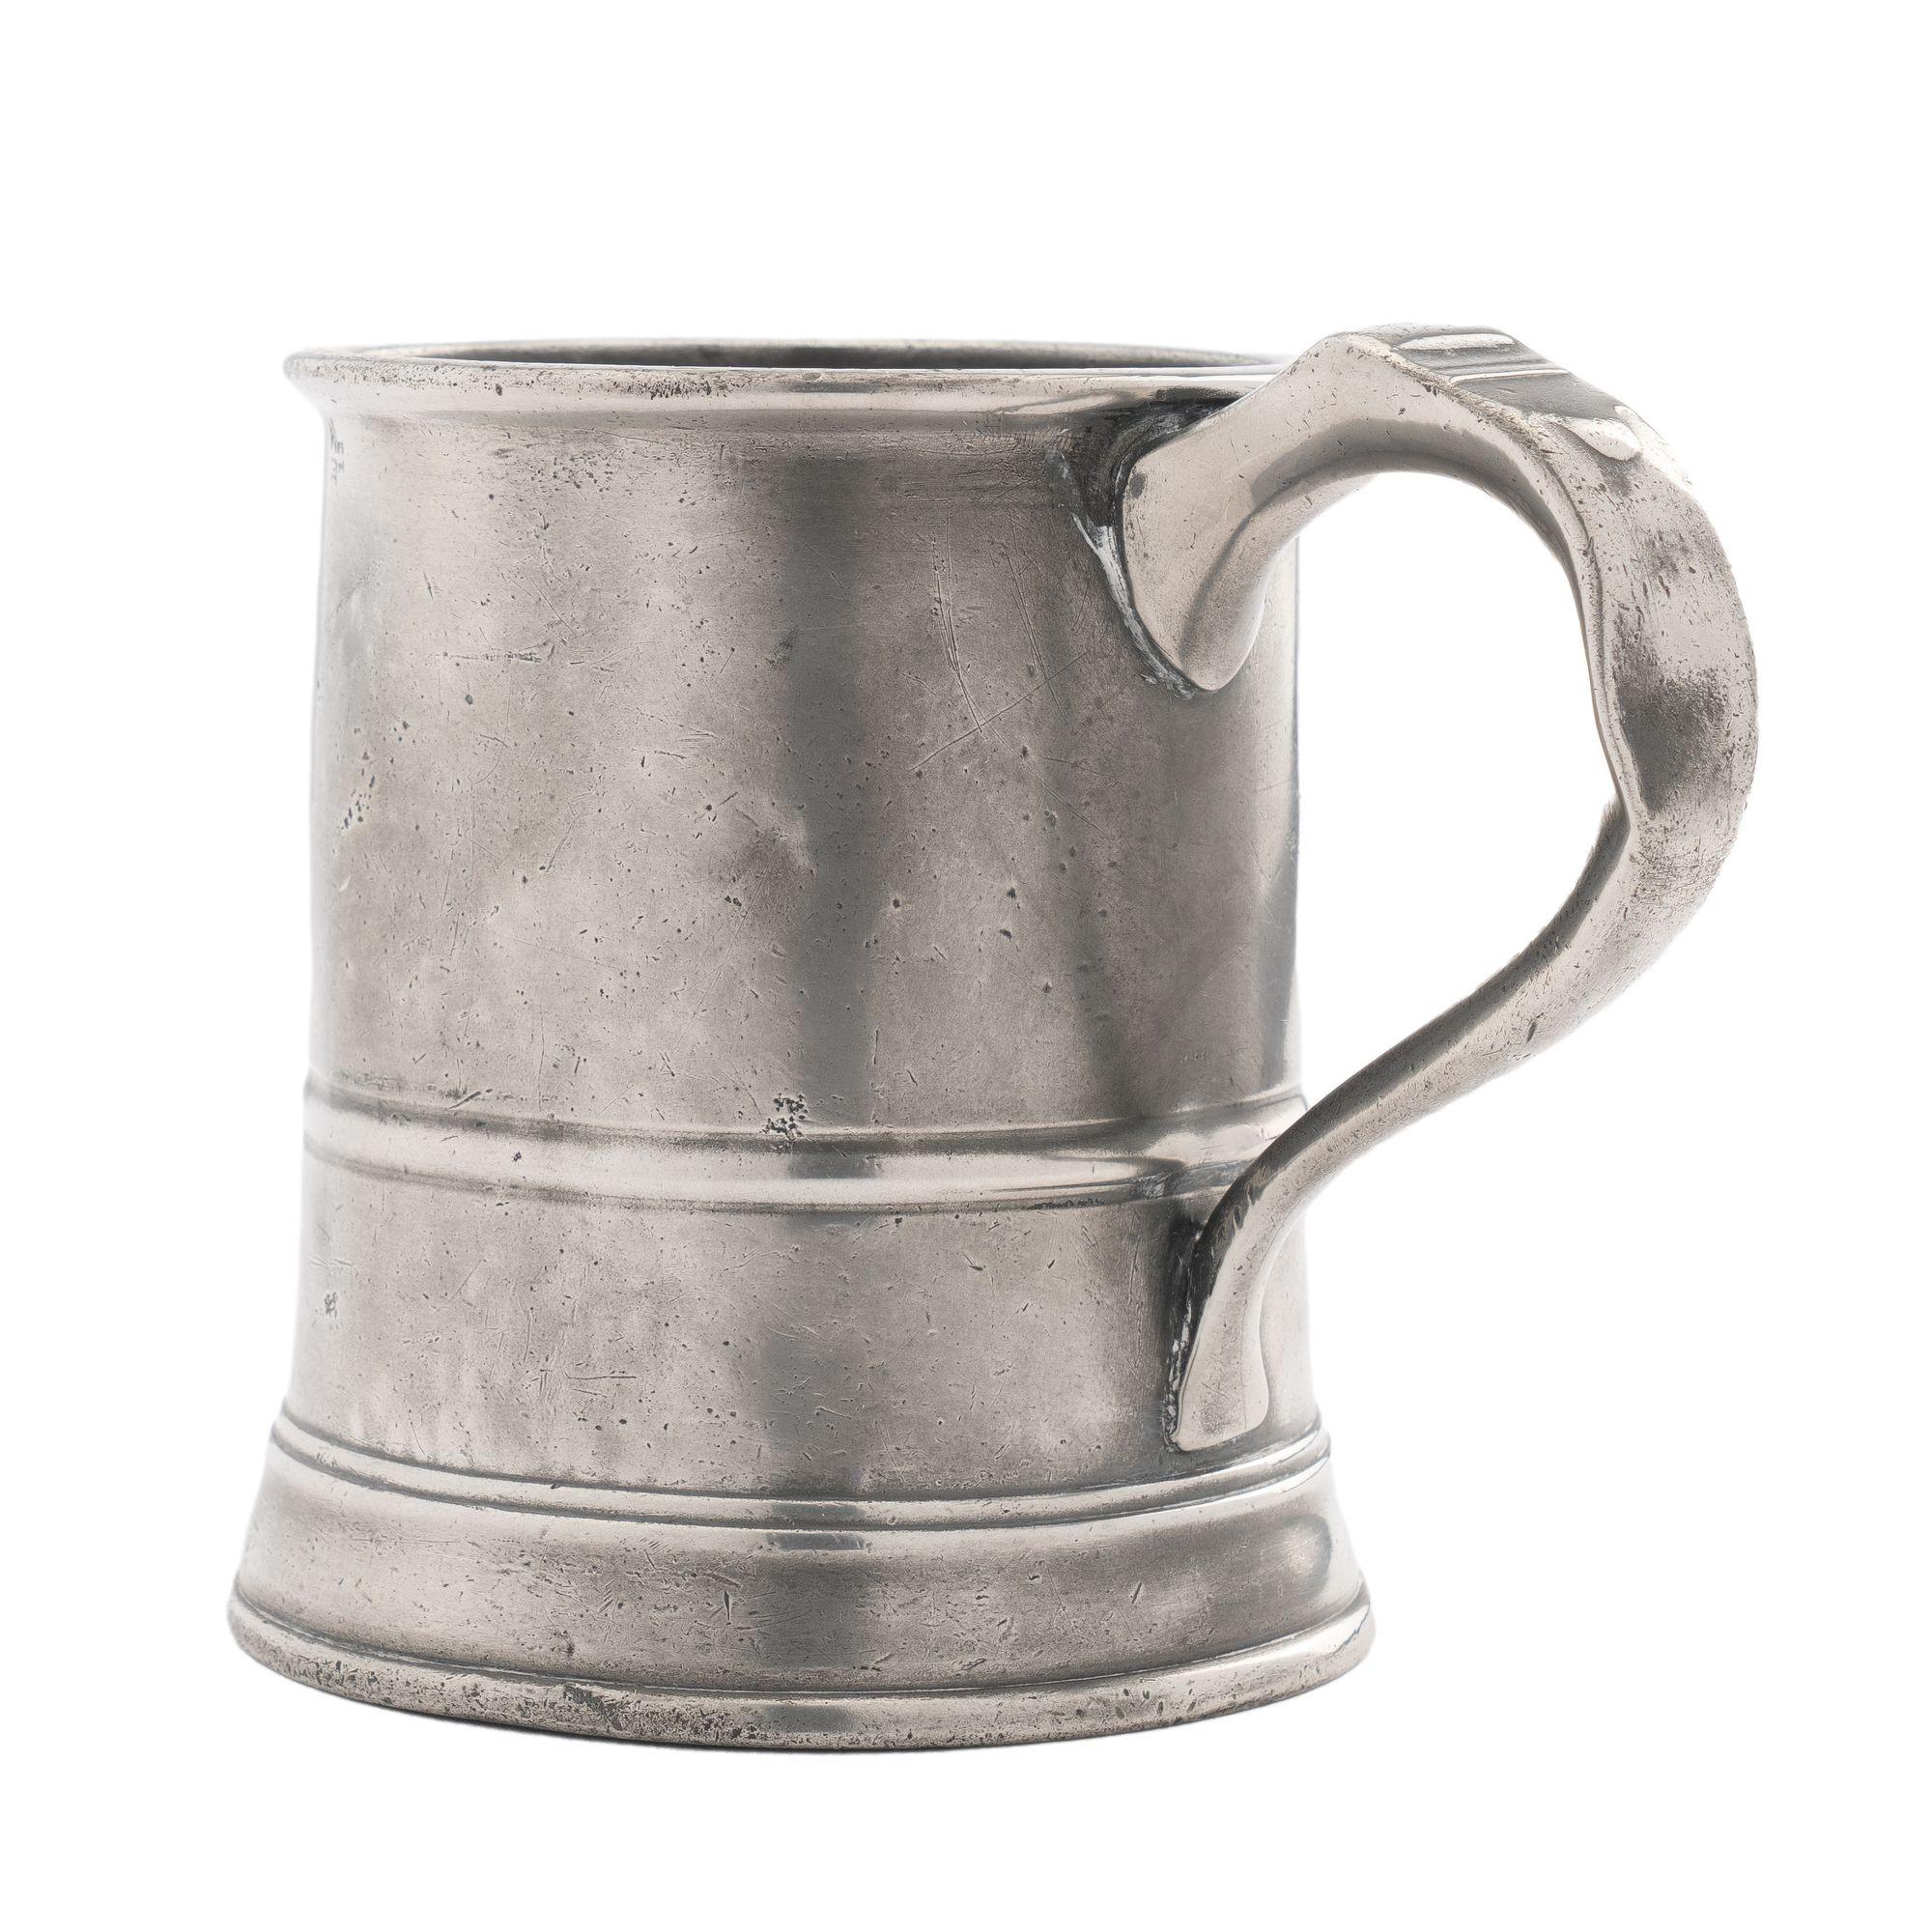 One pint English pewter mug with beaded rim and bead at 2/3s from rim repeated at the ogee base molding. Applied hallow cast loop handle.
England, mid 1800s.